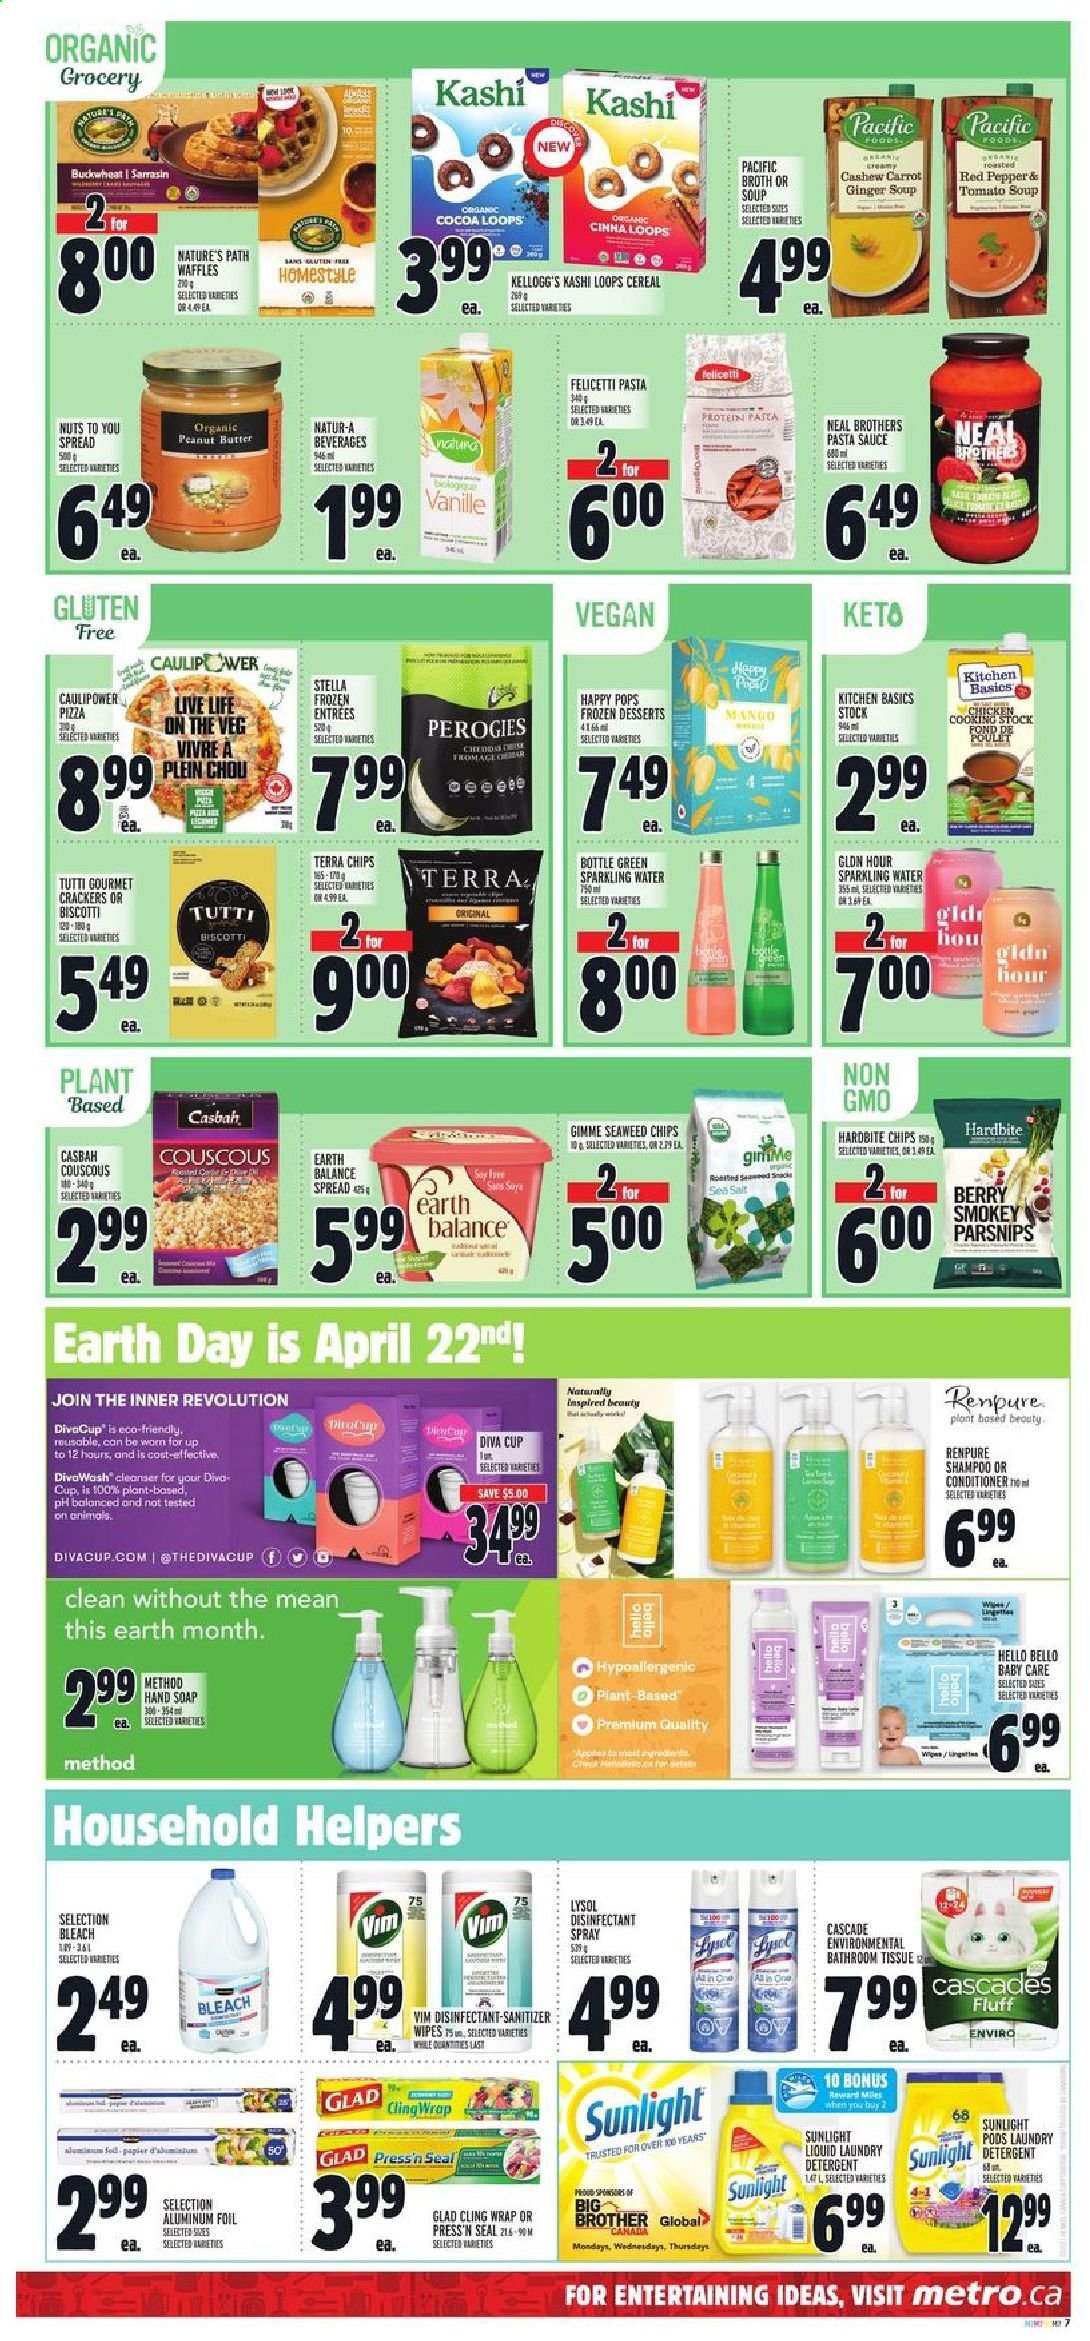 thumbnail - Metro Flyer - April 15, 2021 - April 21, 2021 - Sales products - waffles, ginger, parsnips, tomato soup, pizza, pasta sauce, soup, sauce, biscotti, crackers, Kellogg's, cocoa, seaweed, broth, cereals, buckwheat, peanut butter, sparkling water, BROTHERS, wipes, bath tissue, bleach, Lysol, laundry detergent, Sunlight, Cascade, hand soap, soap, cleanser, conditioner, antibacterial spray, cup, aluminium foil, Brother, clingwrap, shampoo, desinfection. Page 11.